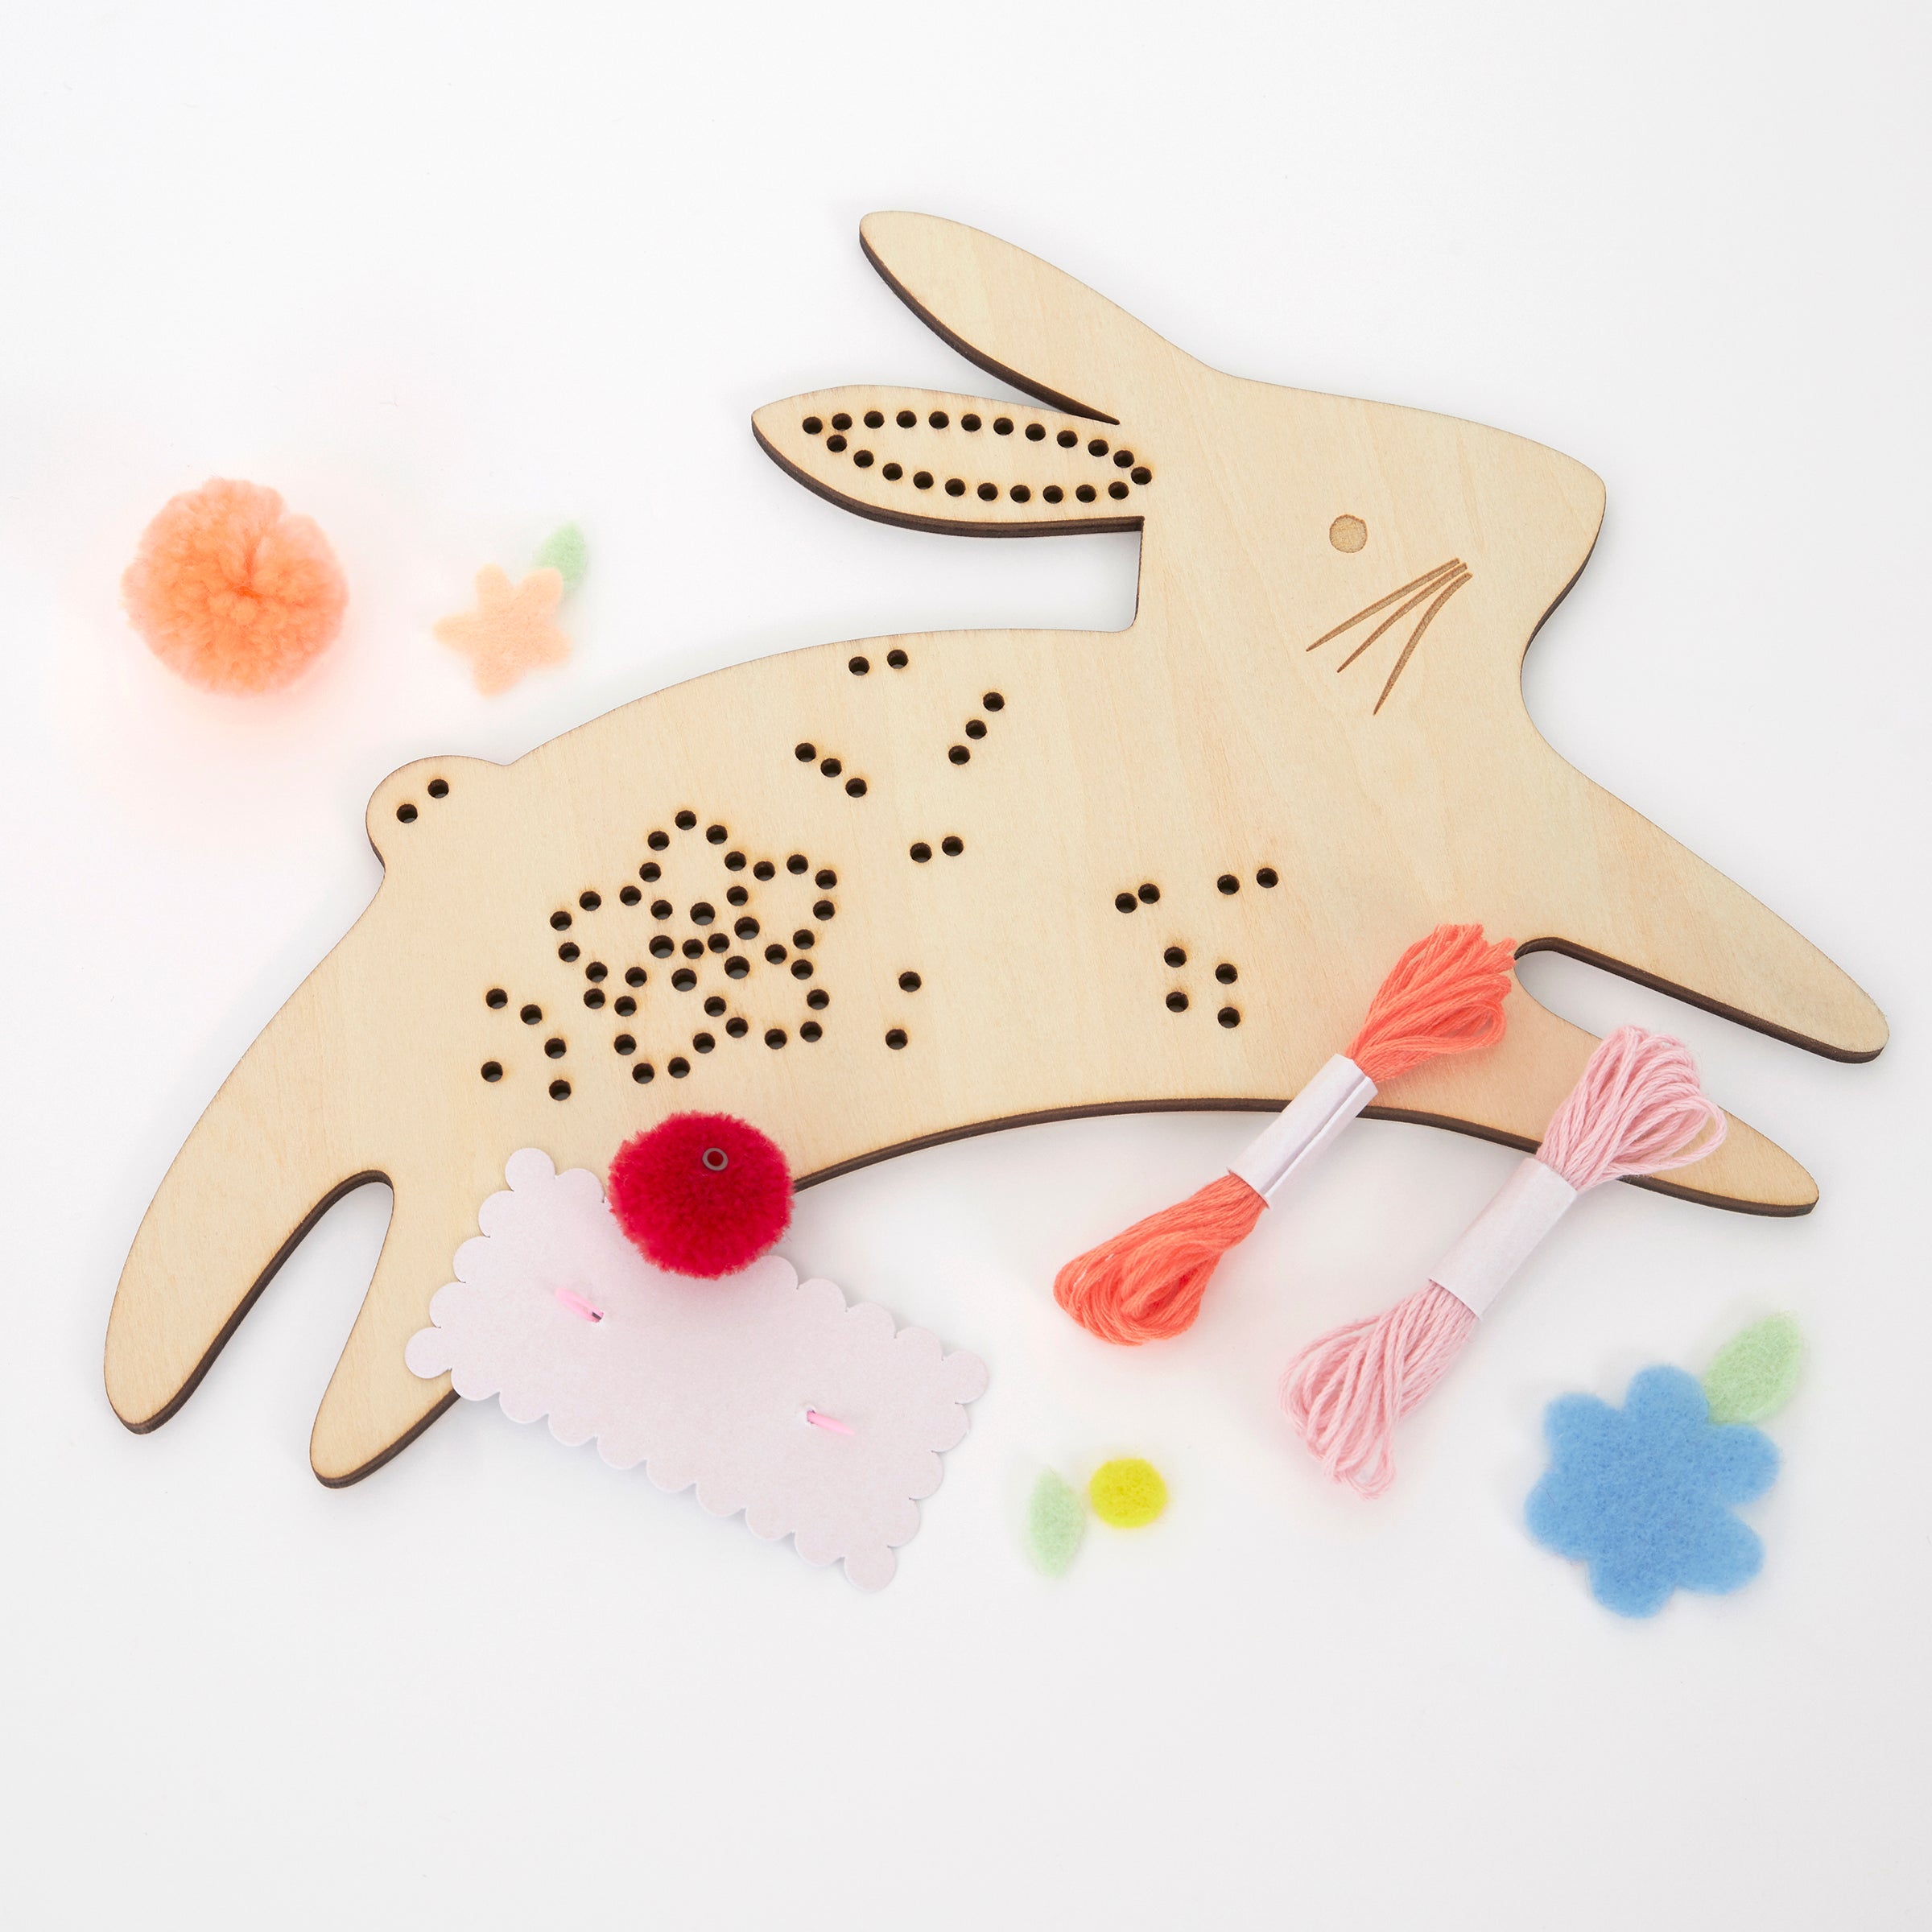 Kids who love crafts will adore this creative gift, with a wooden bunny to embroider, perfect as an Easter gift for kids.